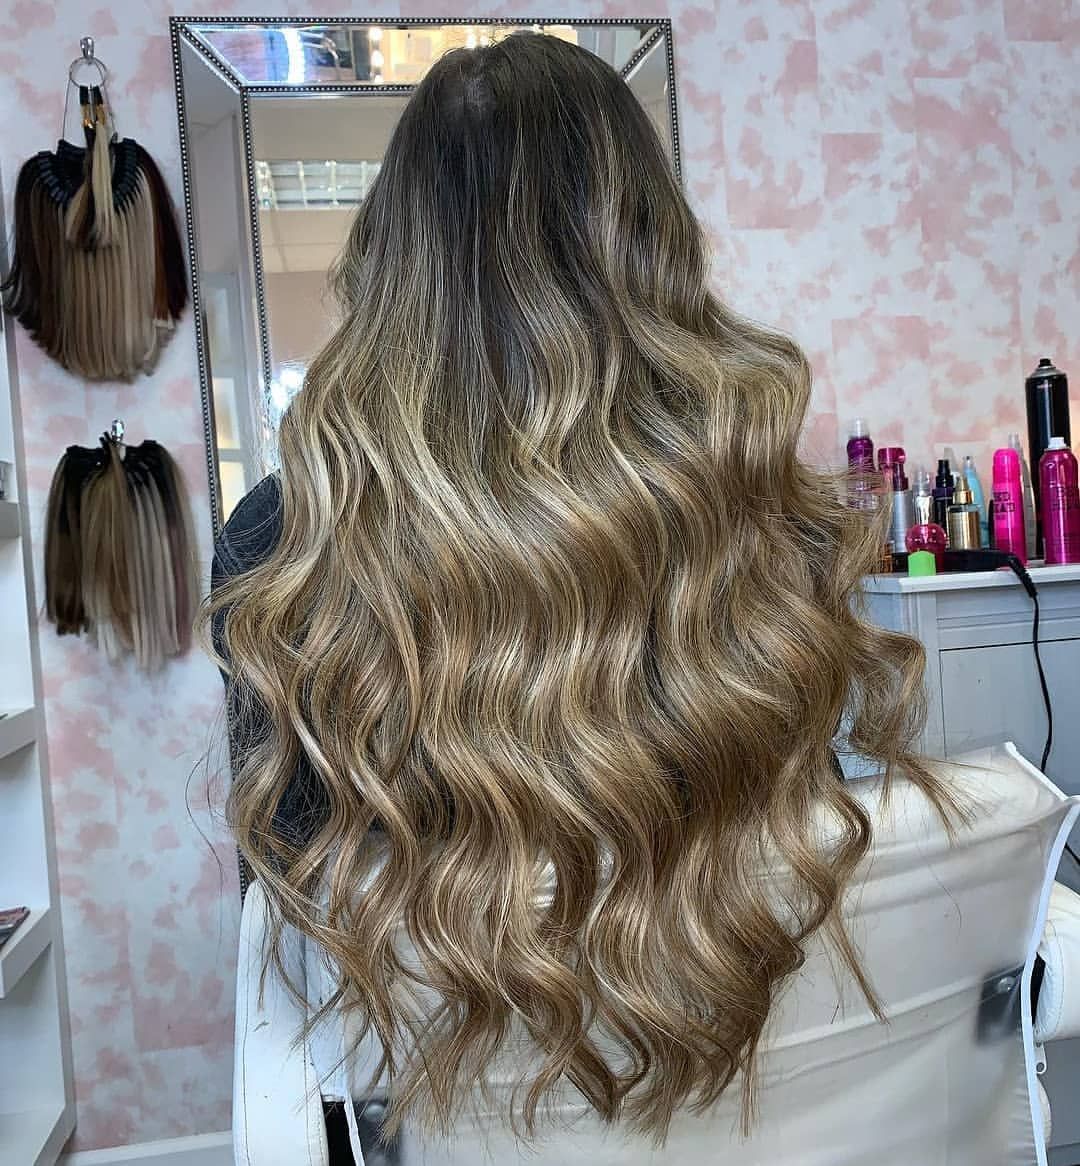 Mocha Melt The Perfect fall Hair Color And How to Achieve It!